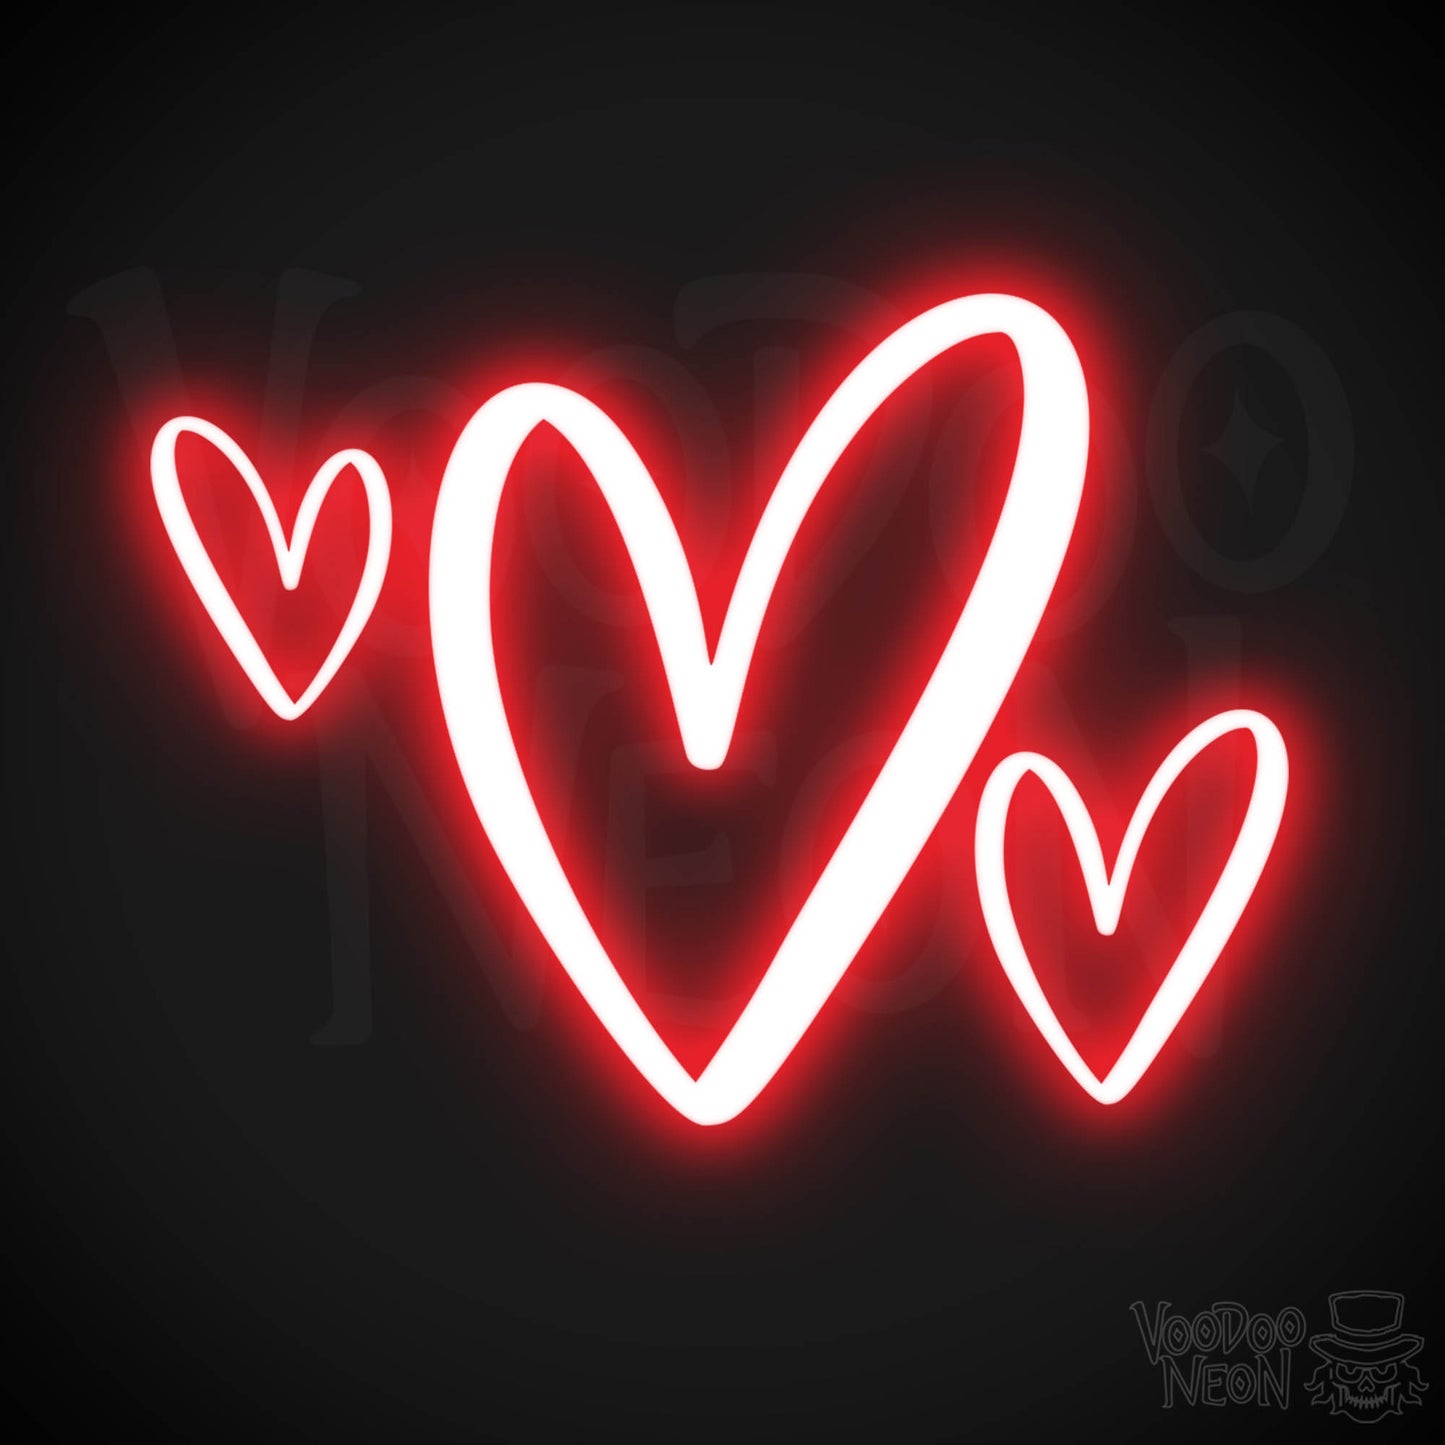 Neon Love Heart - Love Heart Neon Sign - LED Wall Art - Color Red